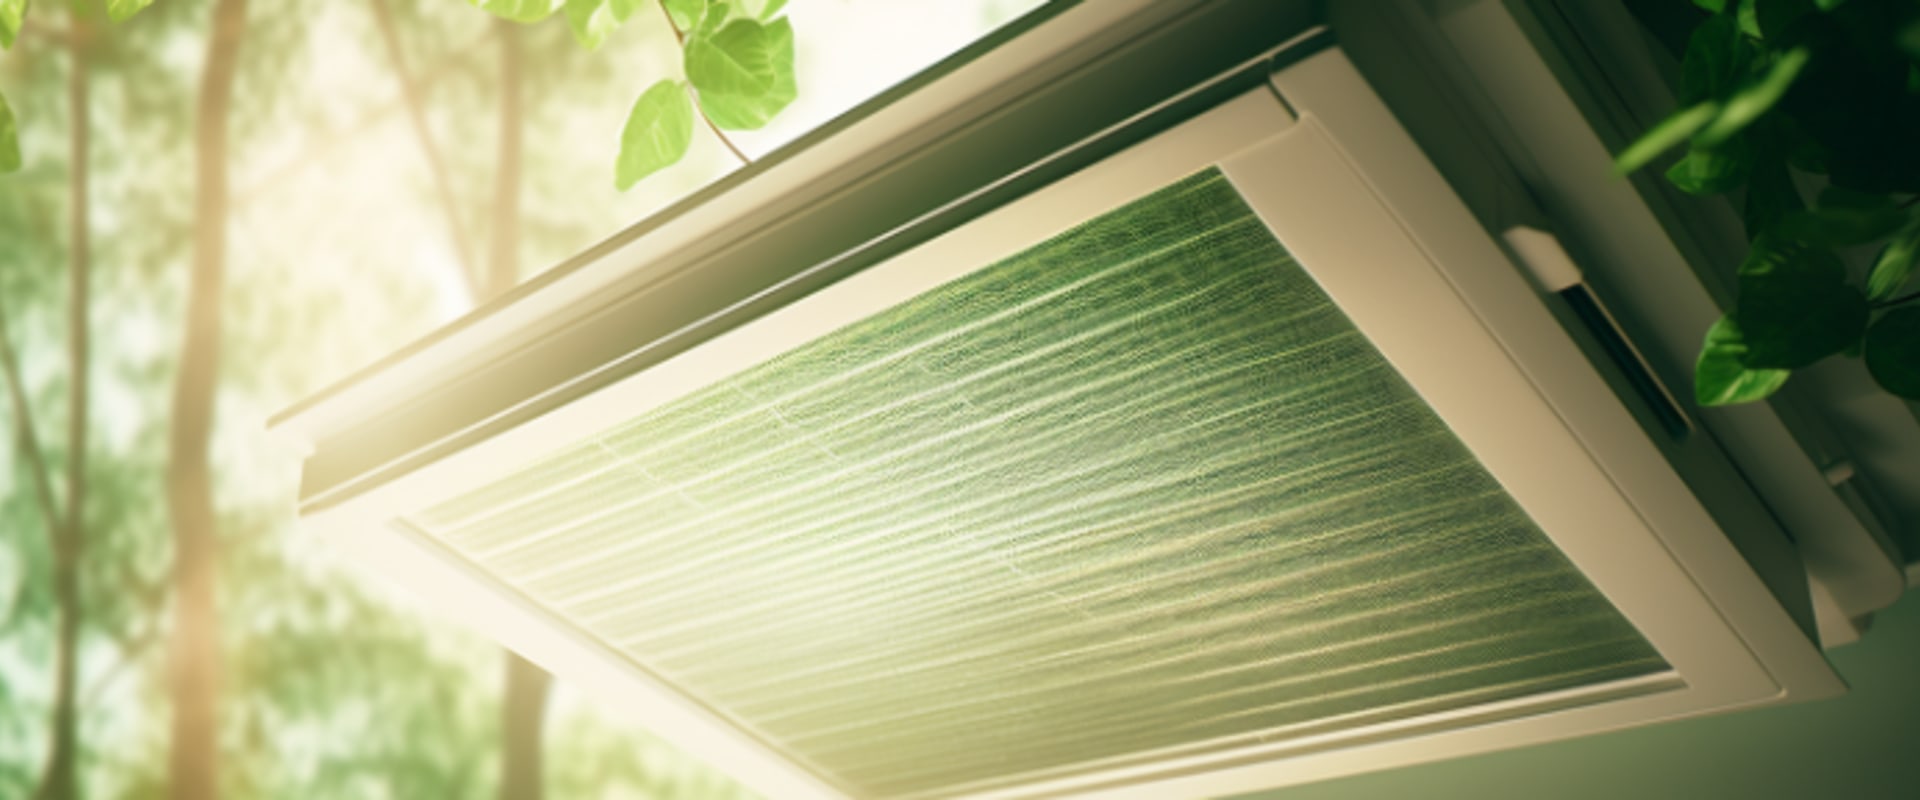 Tips for Maintaining Standard HVAC Air Conditioner Filters